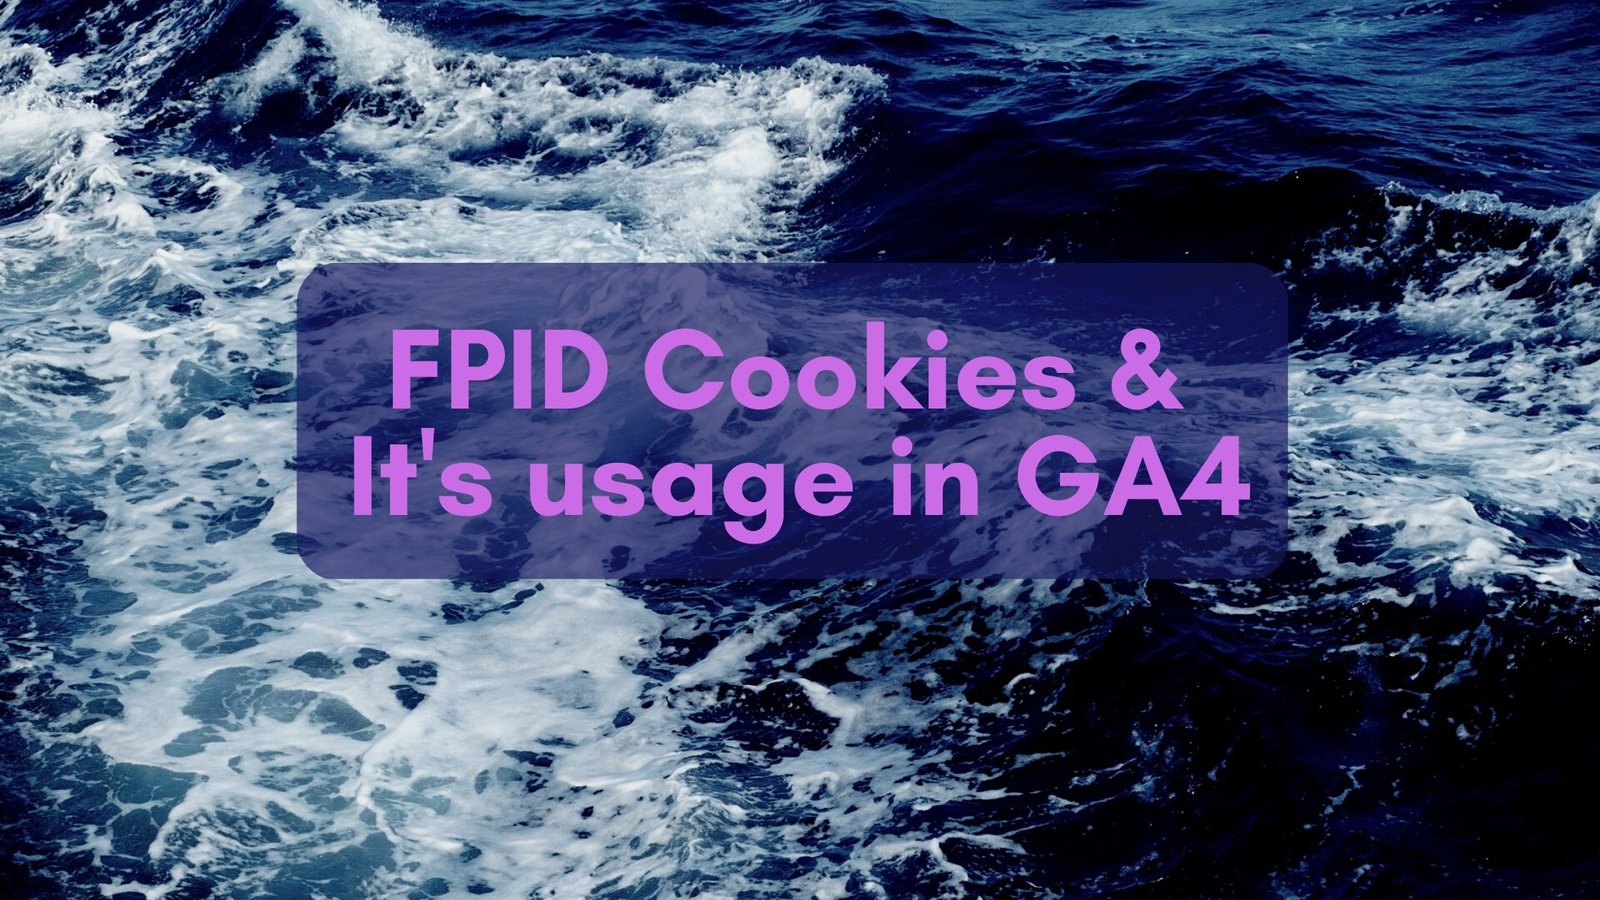 FPID (first-party identifier) Cookies